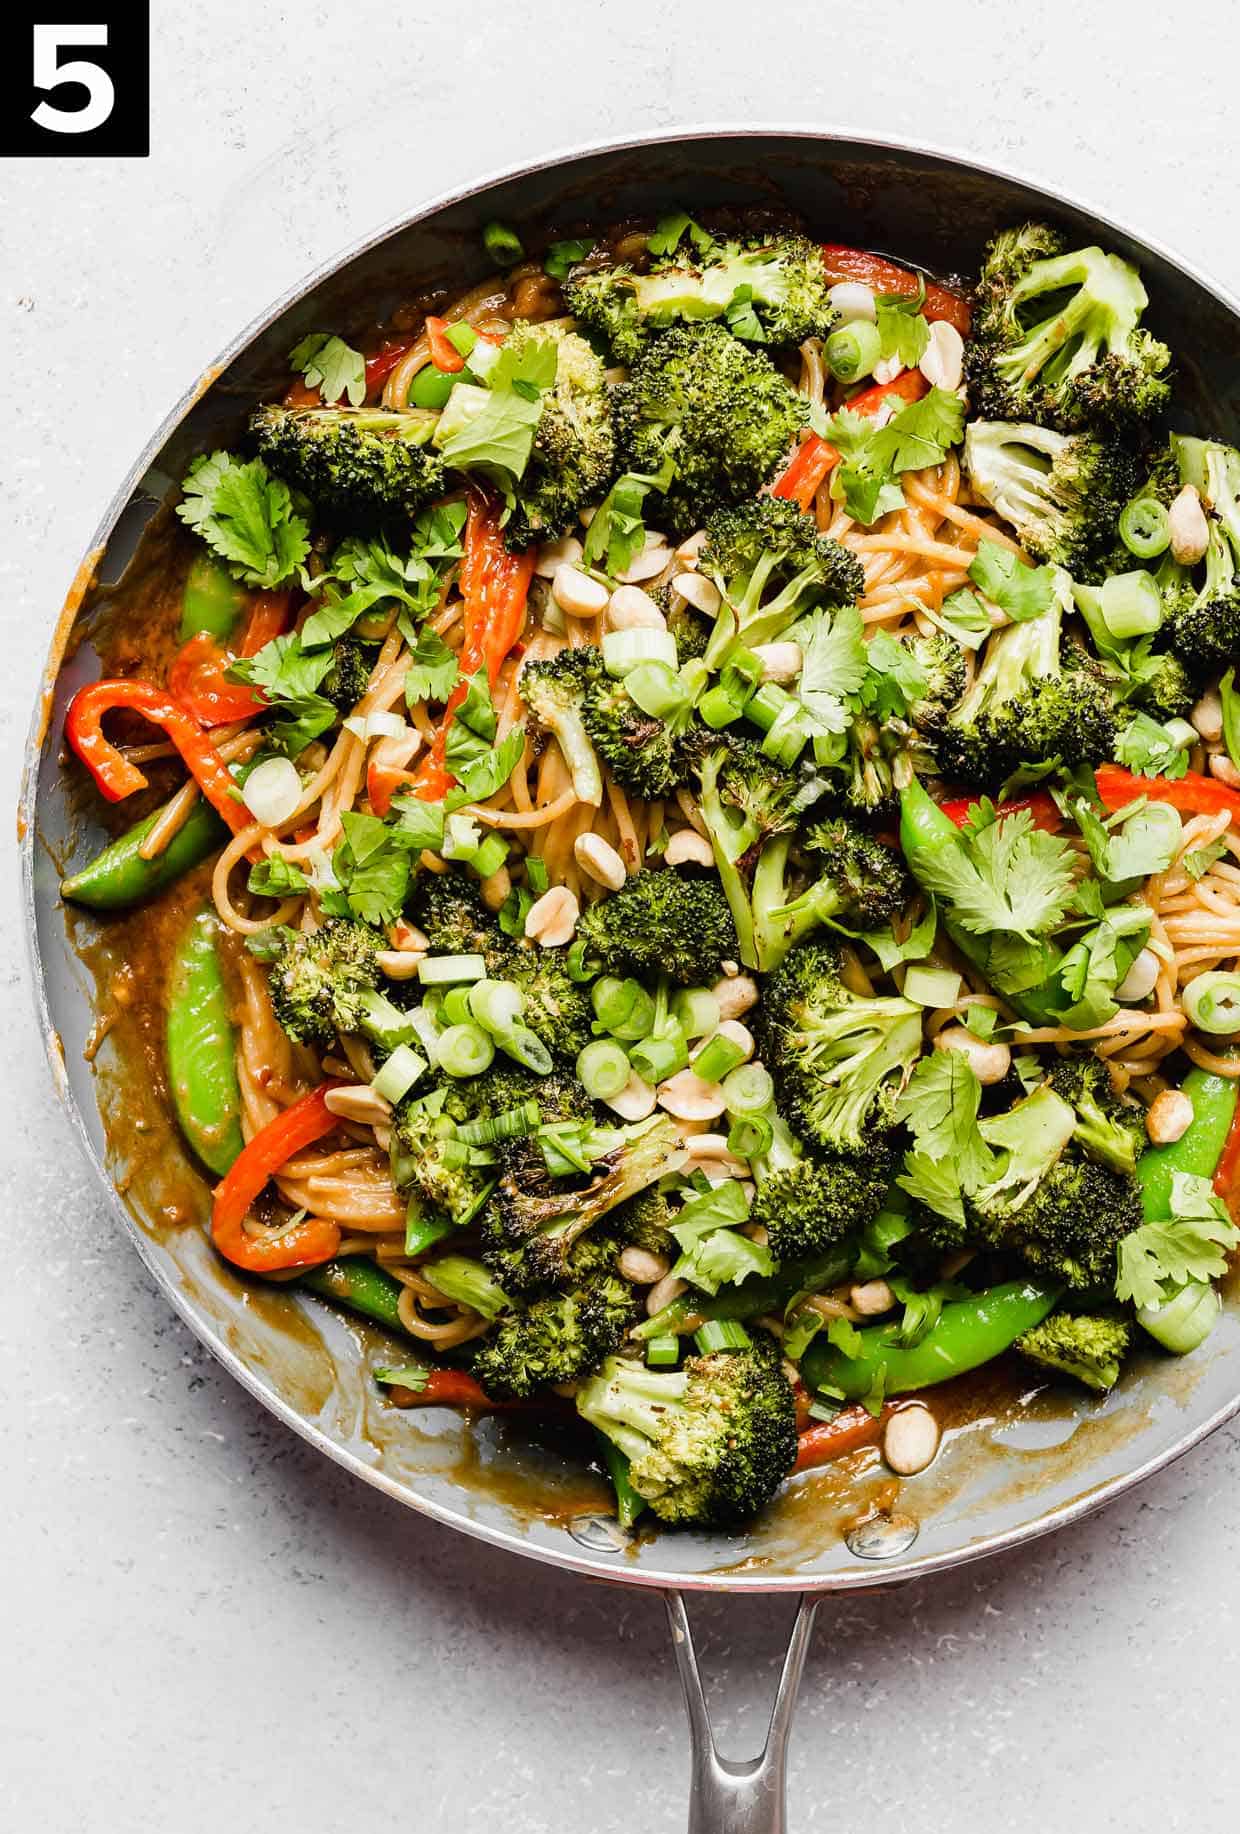 A skillet filled with roasted broccoli peanut butter noodles with vegetables.